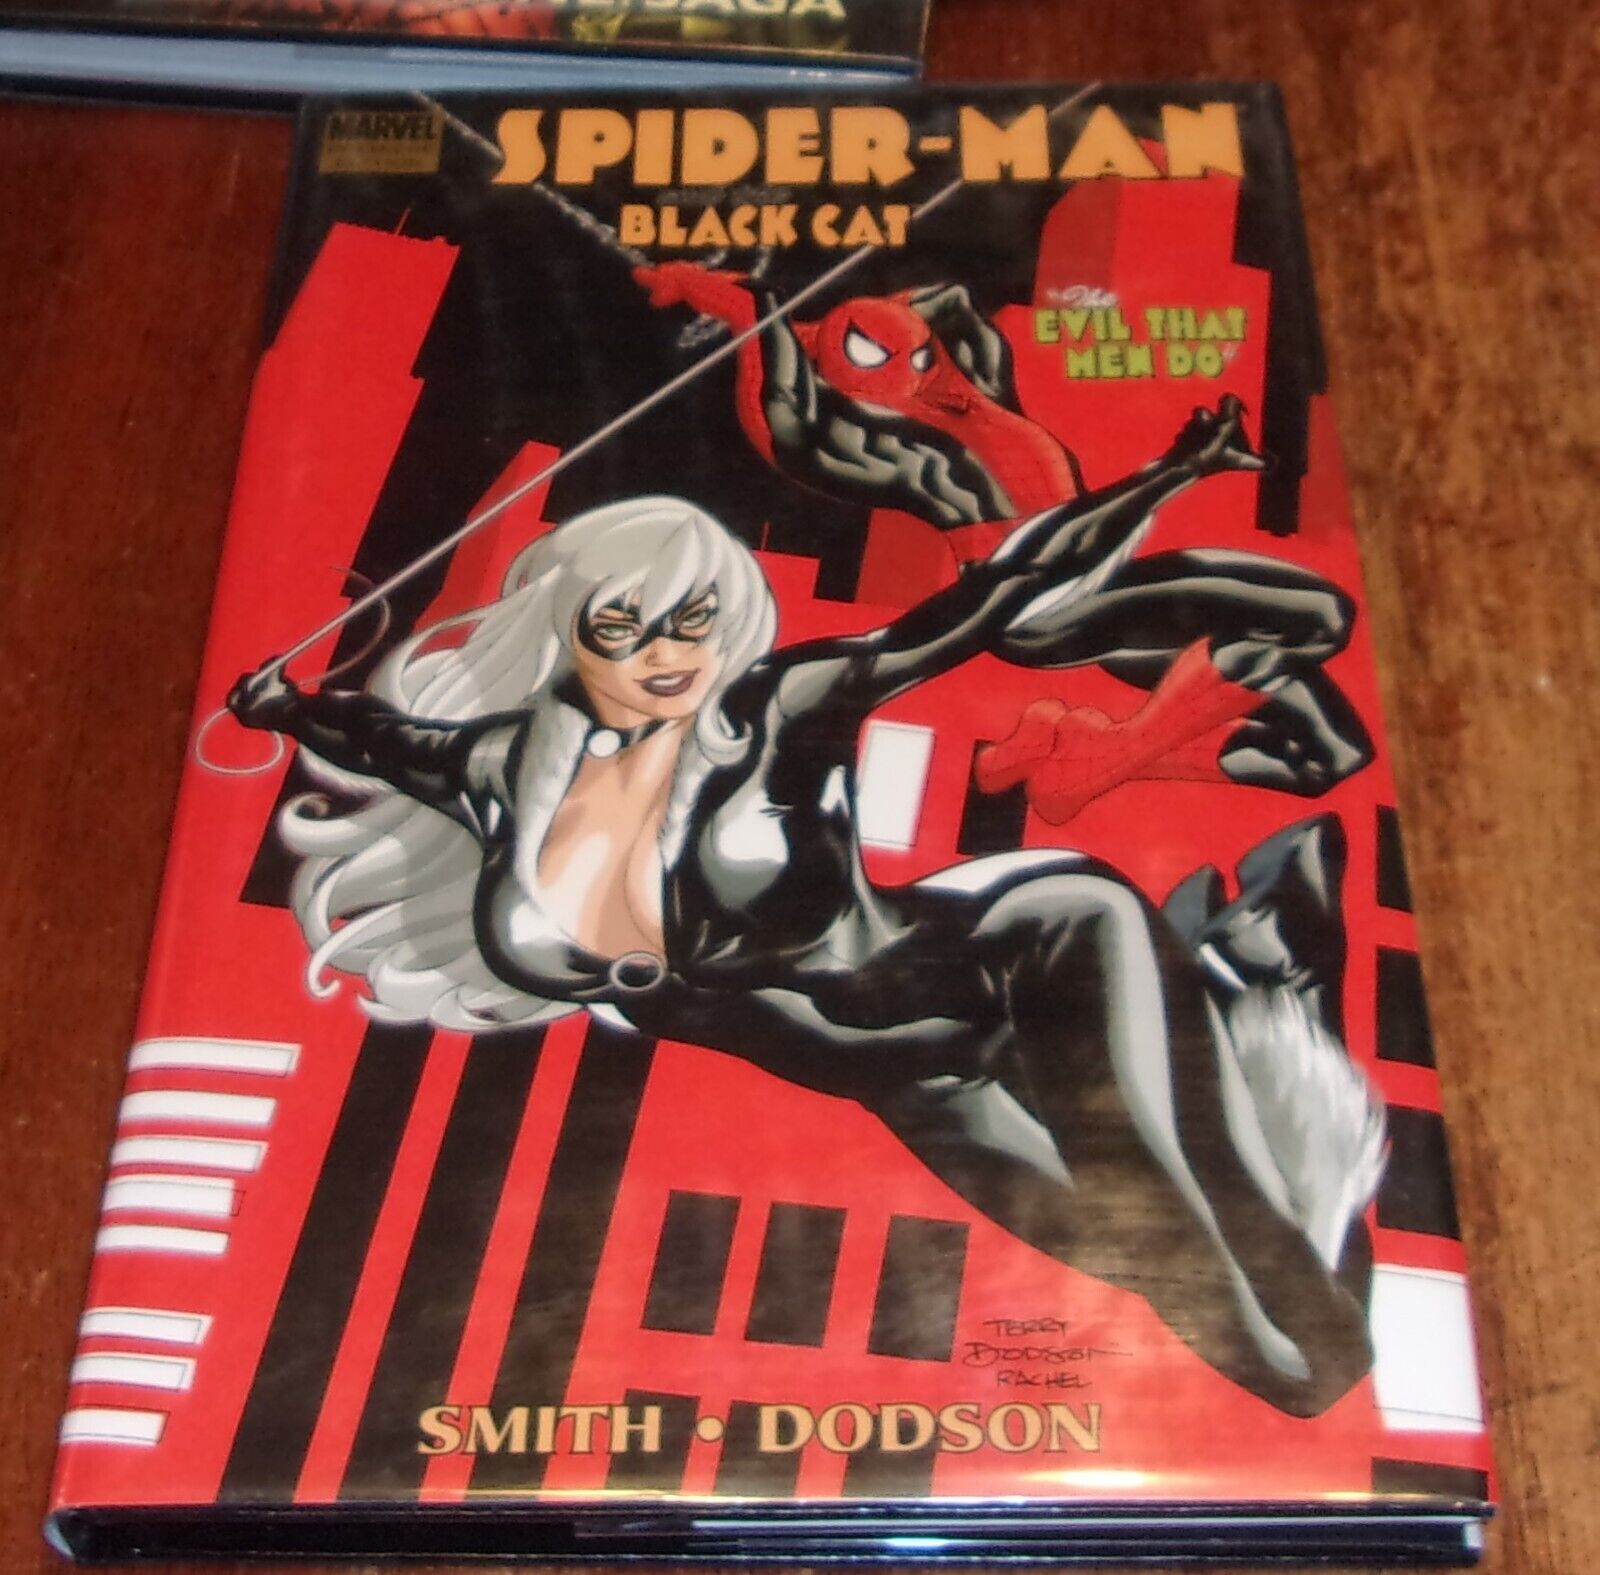 Hardcover Spider-Man and the Black Cat The Evil That Men Do Premiere Edition